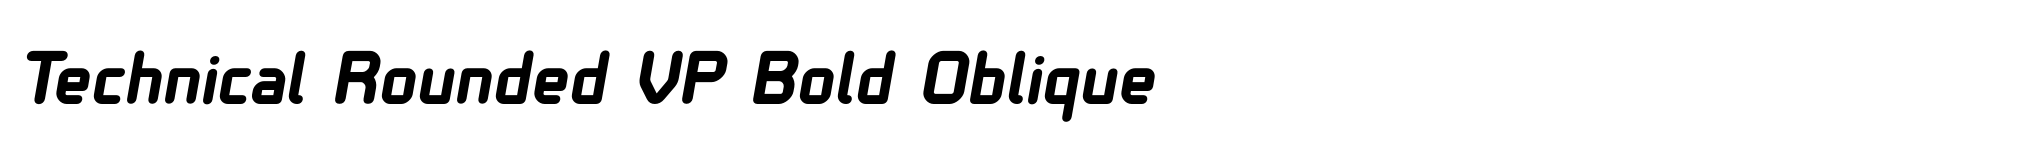 Technical Rounded VP Bold Oblique image